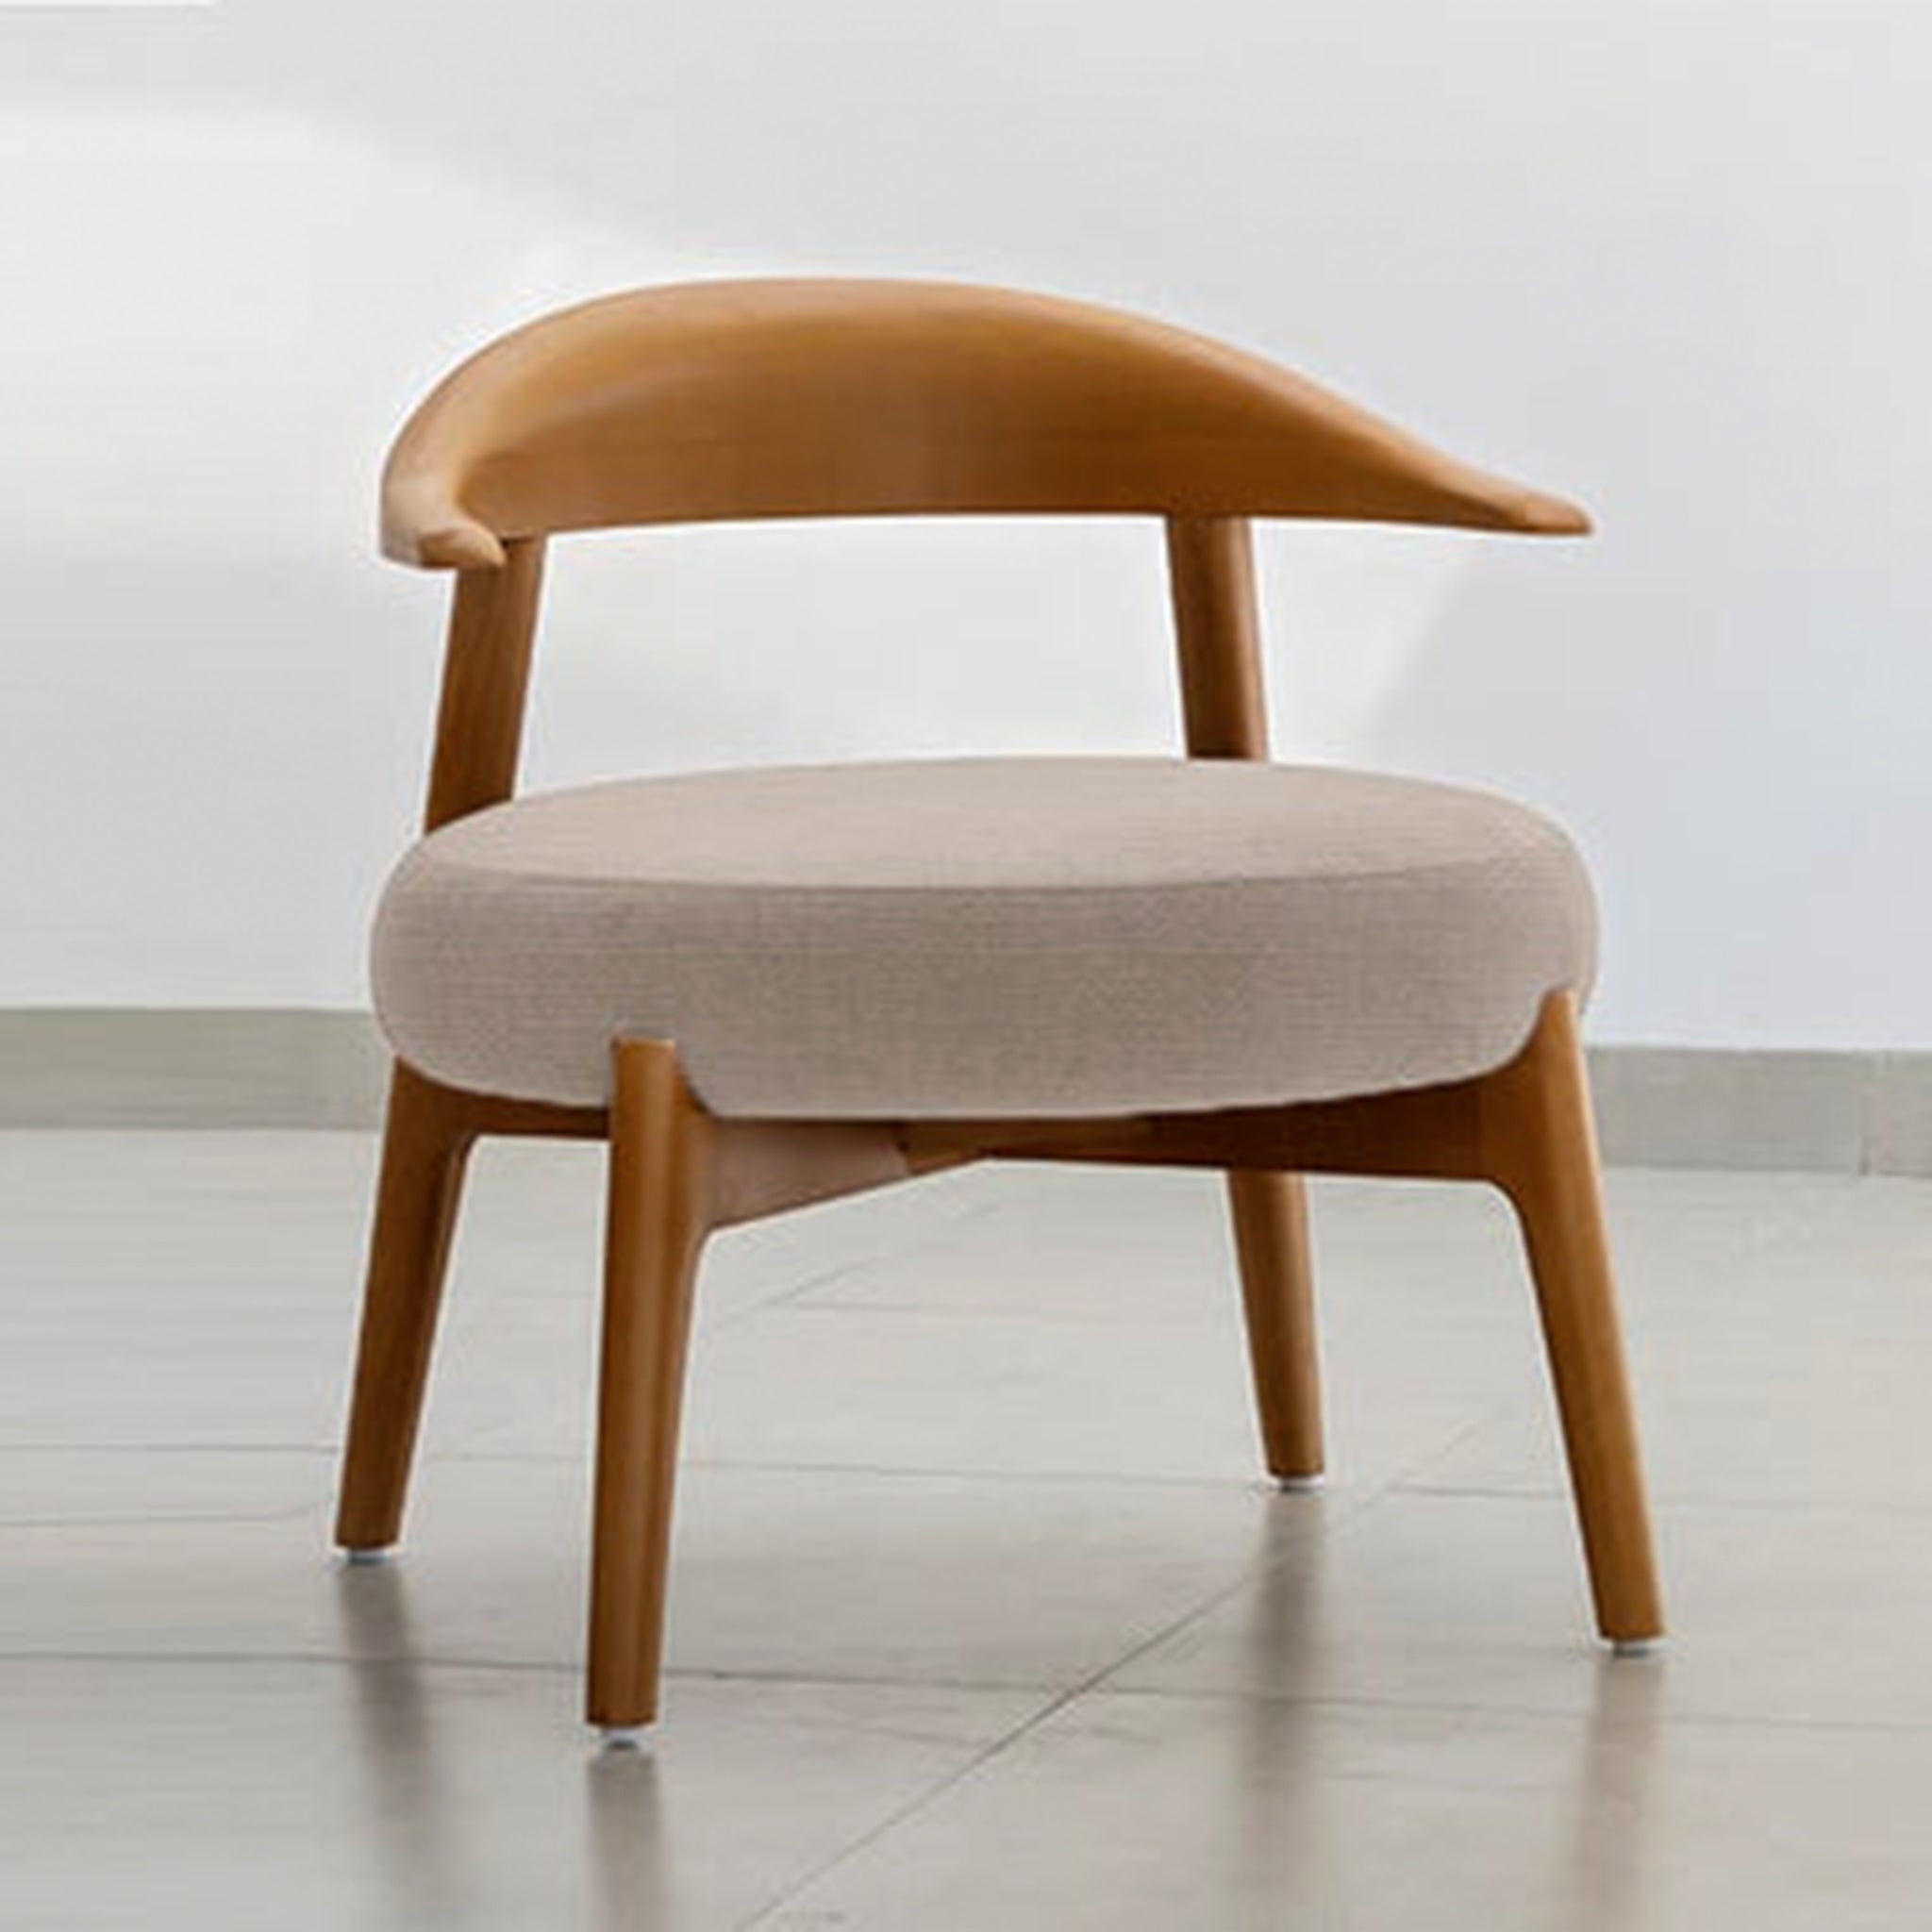 "The Hyde Accent Chair with its unique wooden frame and plush blue seat"